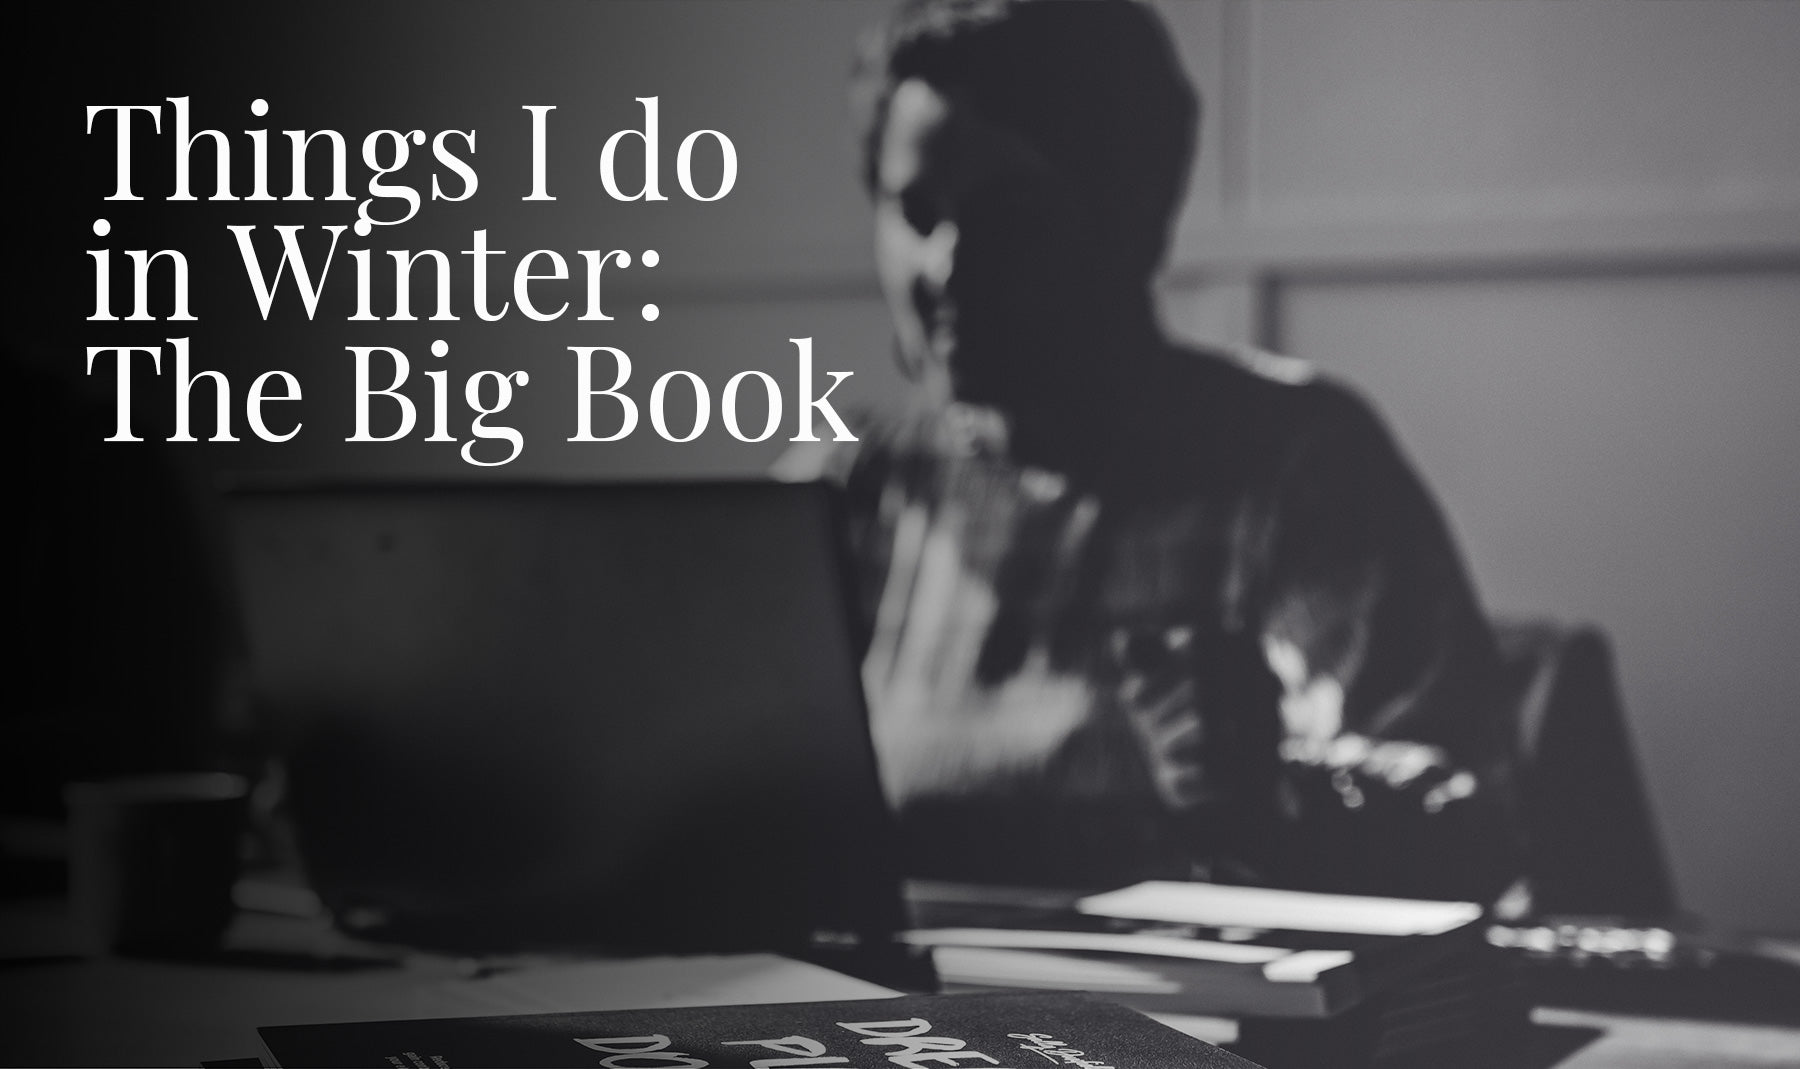 Things I do in Winter: The Big Book